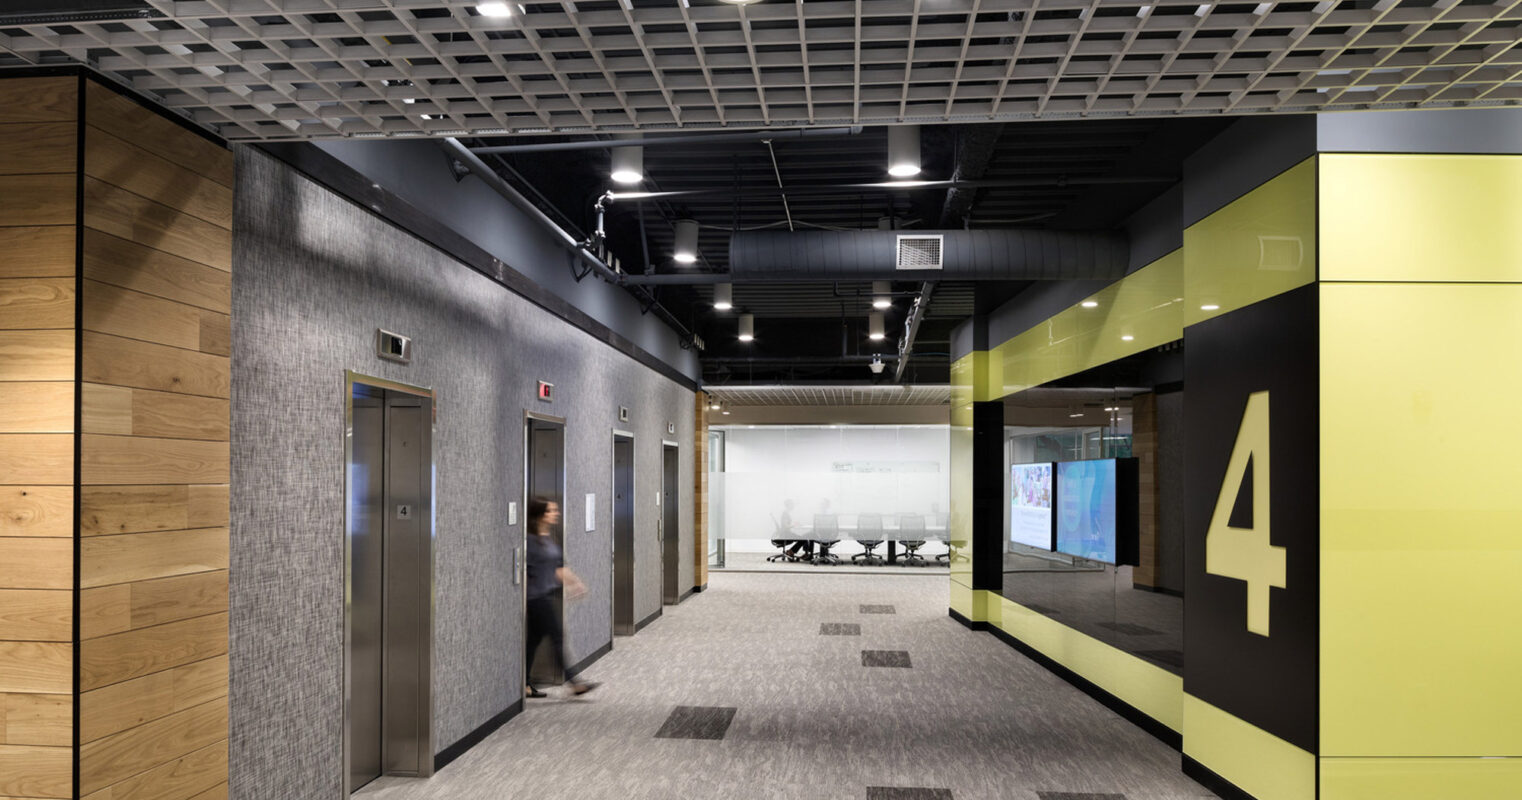 Modern office corridor with textured wood walls and geometric carpet. Black ceiling grid contrasts with recessed lighting above, while lime green accents energize the space. Transparent glass partitions reveal meeting room interiors, enhancing openness. Large numerals denote room numbers, guiding navigation.